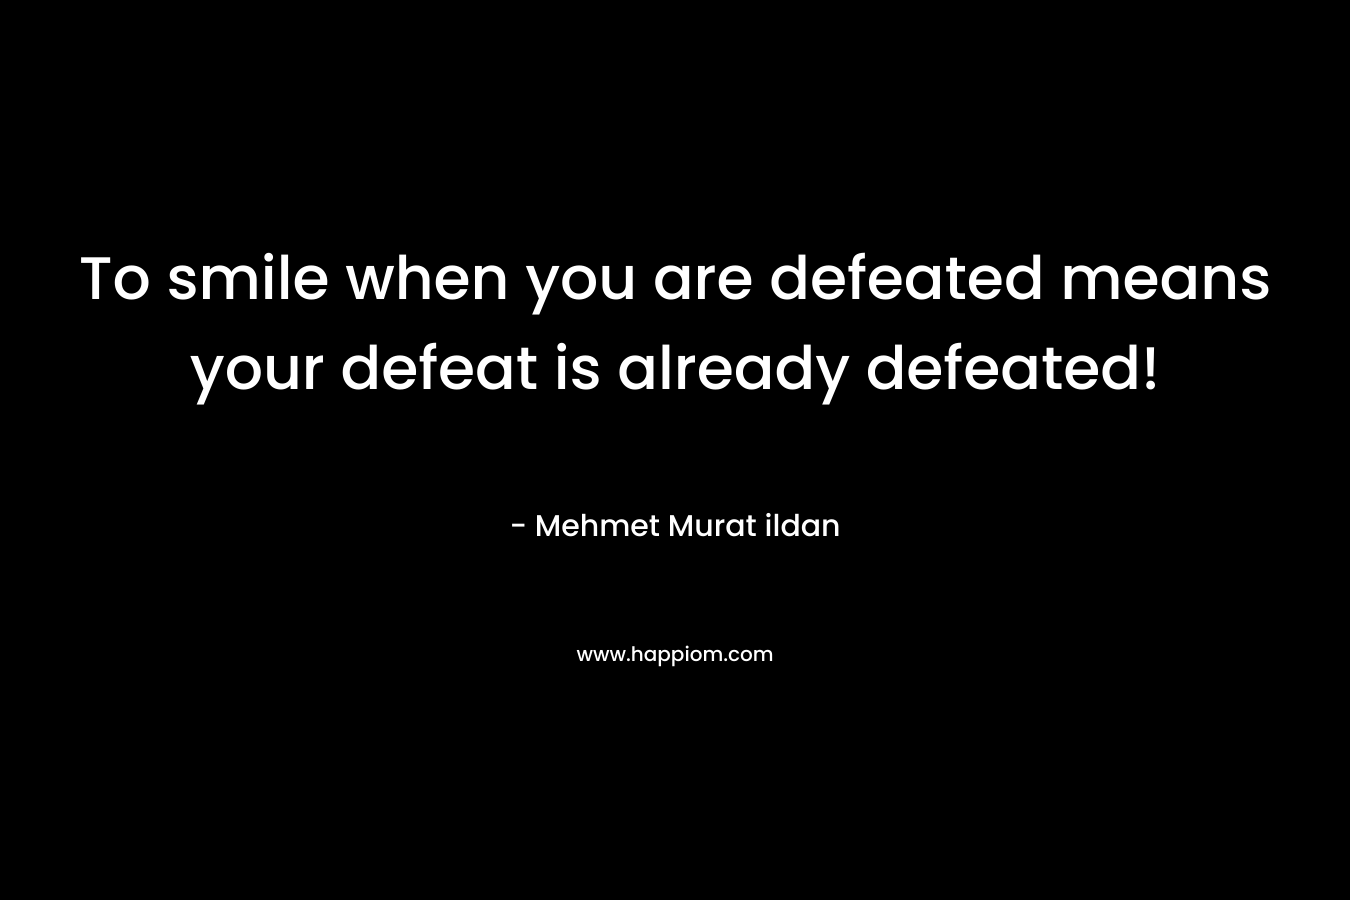 To smile when you are defeated means your defeat is already defeated!